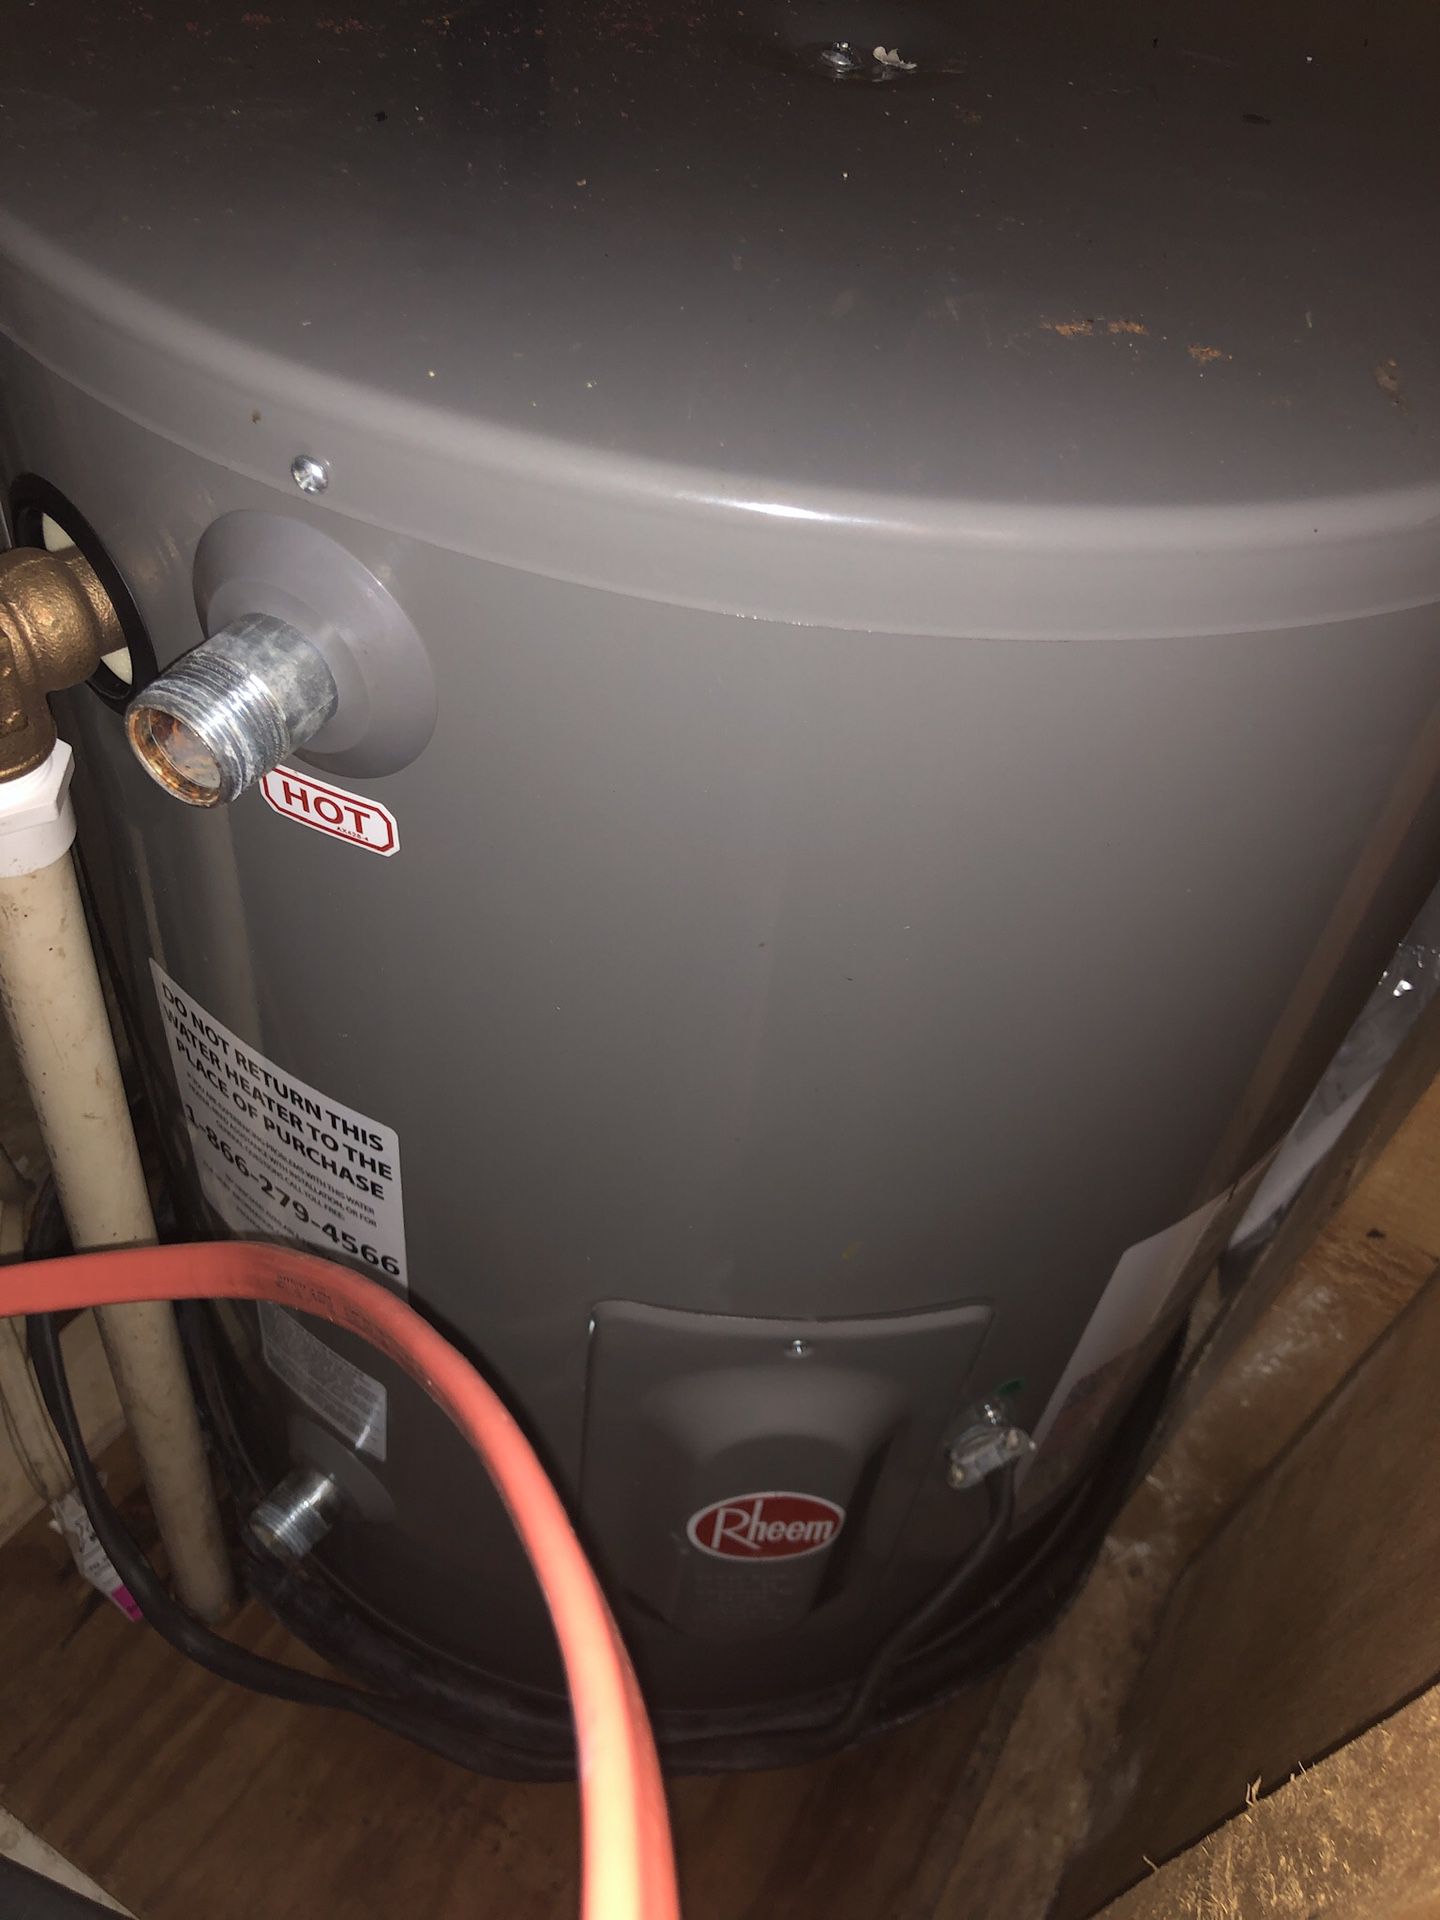 Rheem 20 gal. Water heater. About a year old.